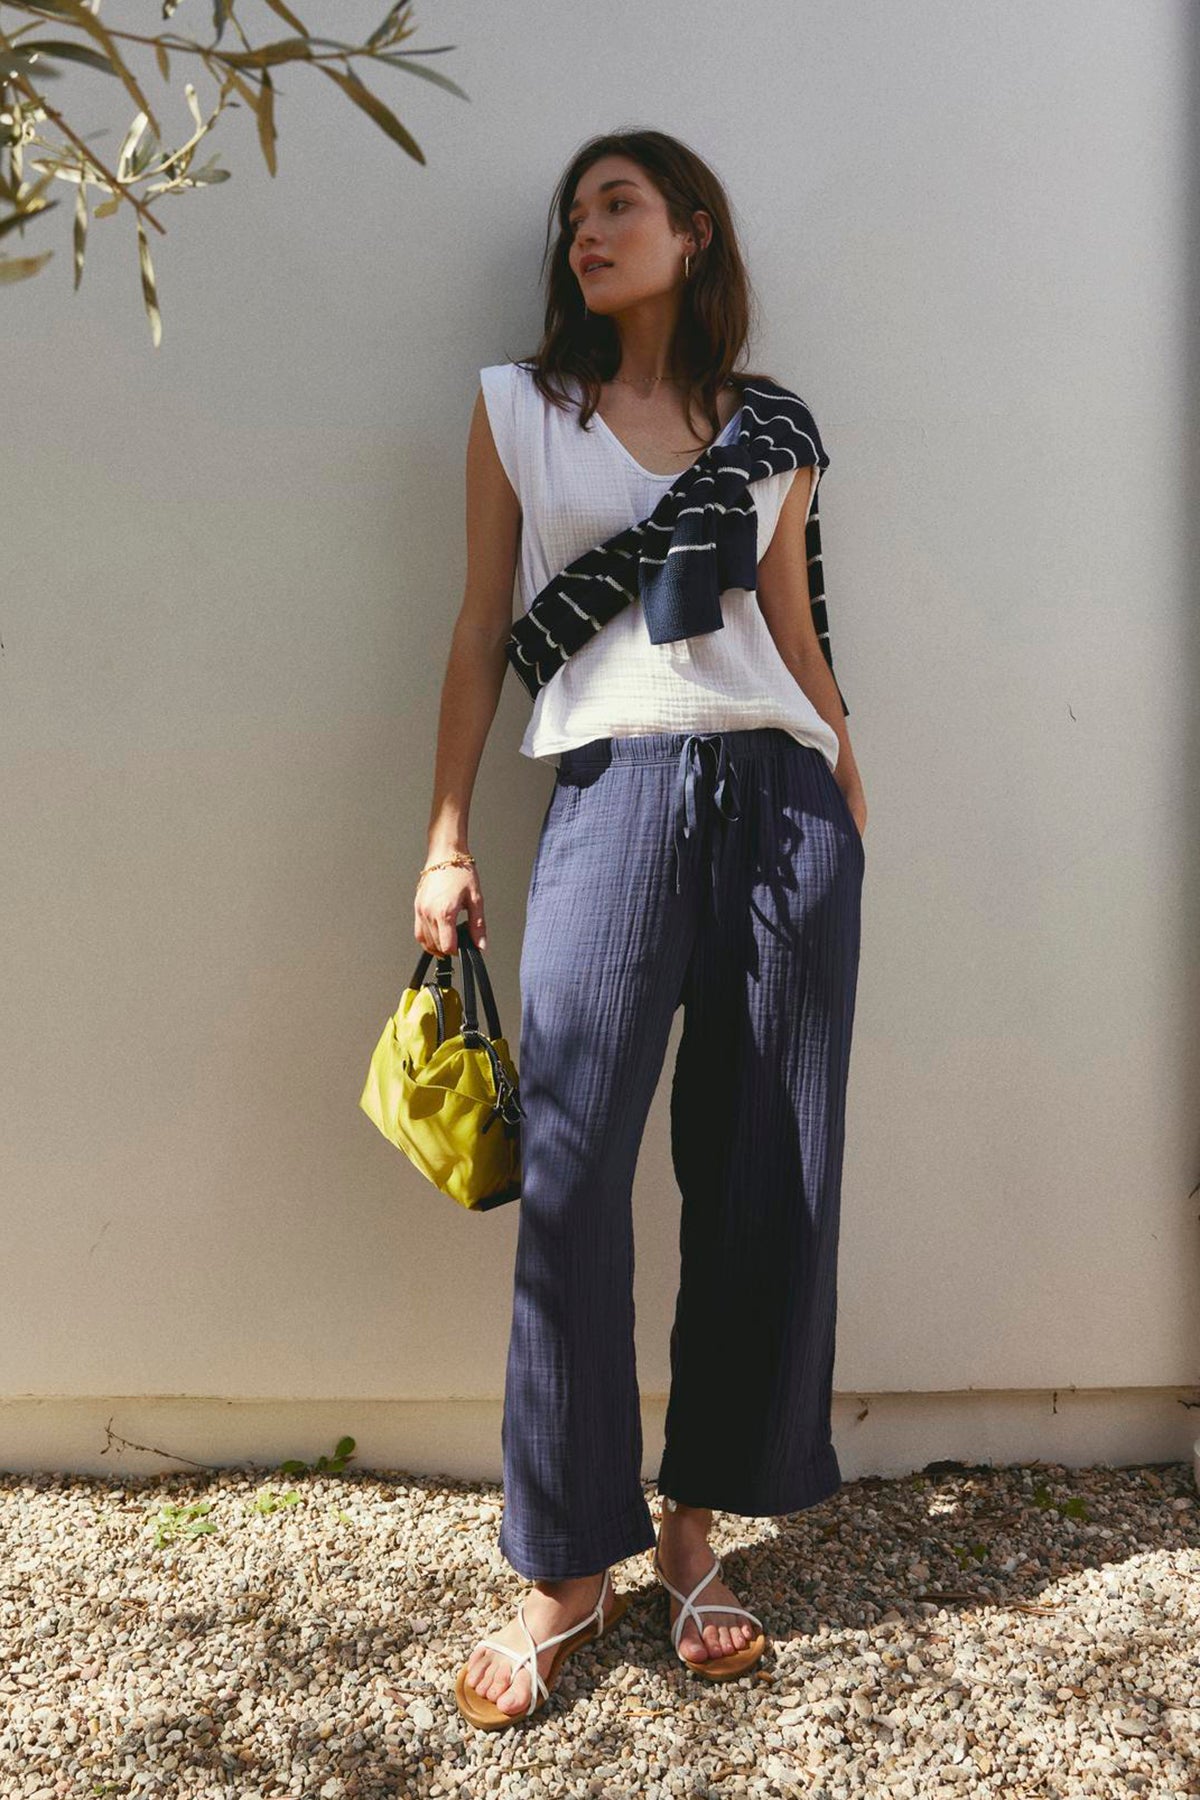   Woman standing in sunlight leaning against a wall, wearing a CHAYSE STRIPED CREW NECK SWEATER sweater from Velvet by Graham & Spencer, striped pants, and sandals, holding a green bag in a relaxed silhouette. 